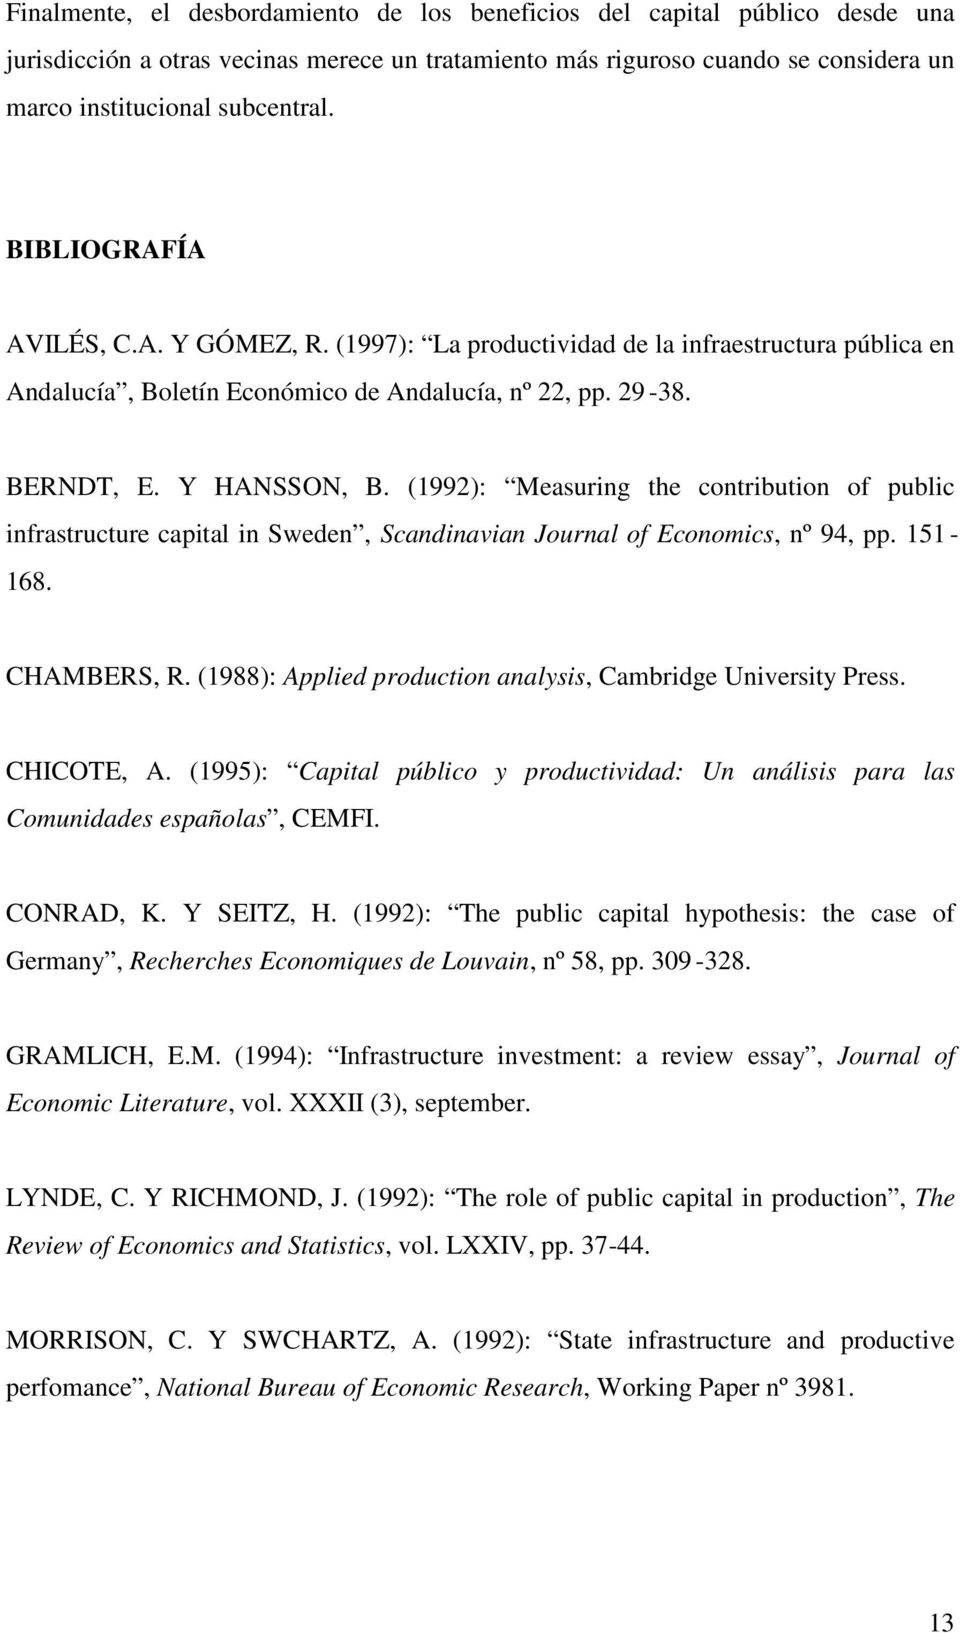 (1992): Measurng the contrbuton of publc nfrastructure captal n Sweden, Scandnavan Journal of Economcs, nº 94, pp. 151-168. CHAMBERS, R. (1988): Appled producton analyss, Cambrdge Unversty Press.